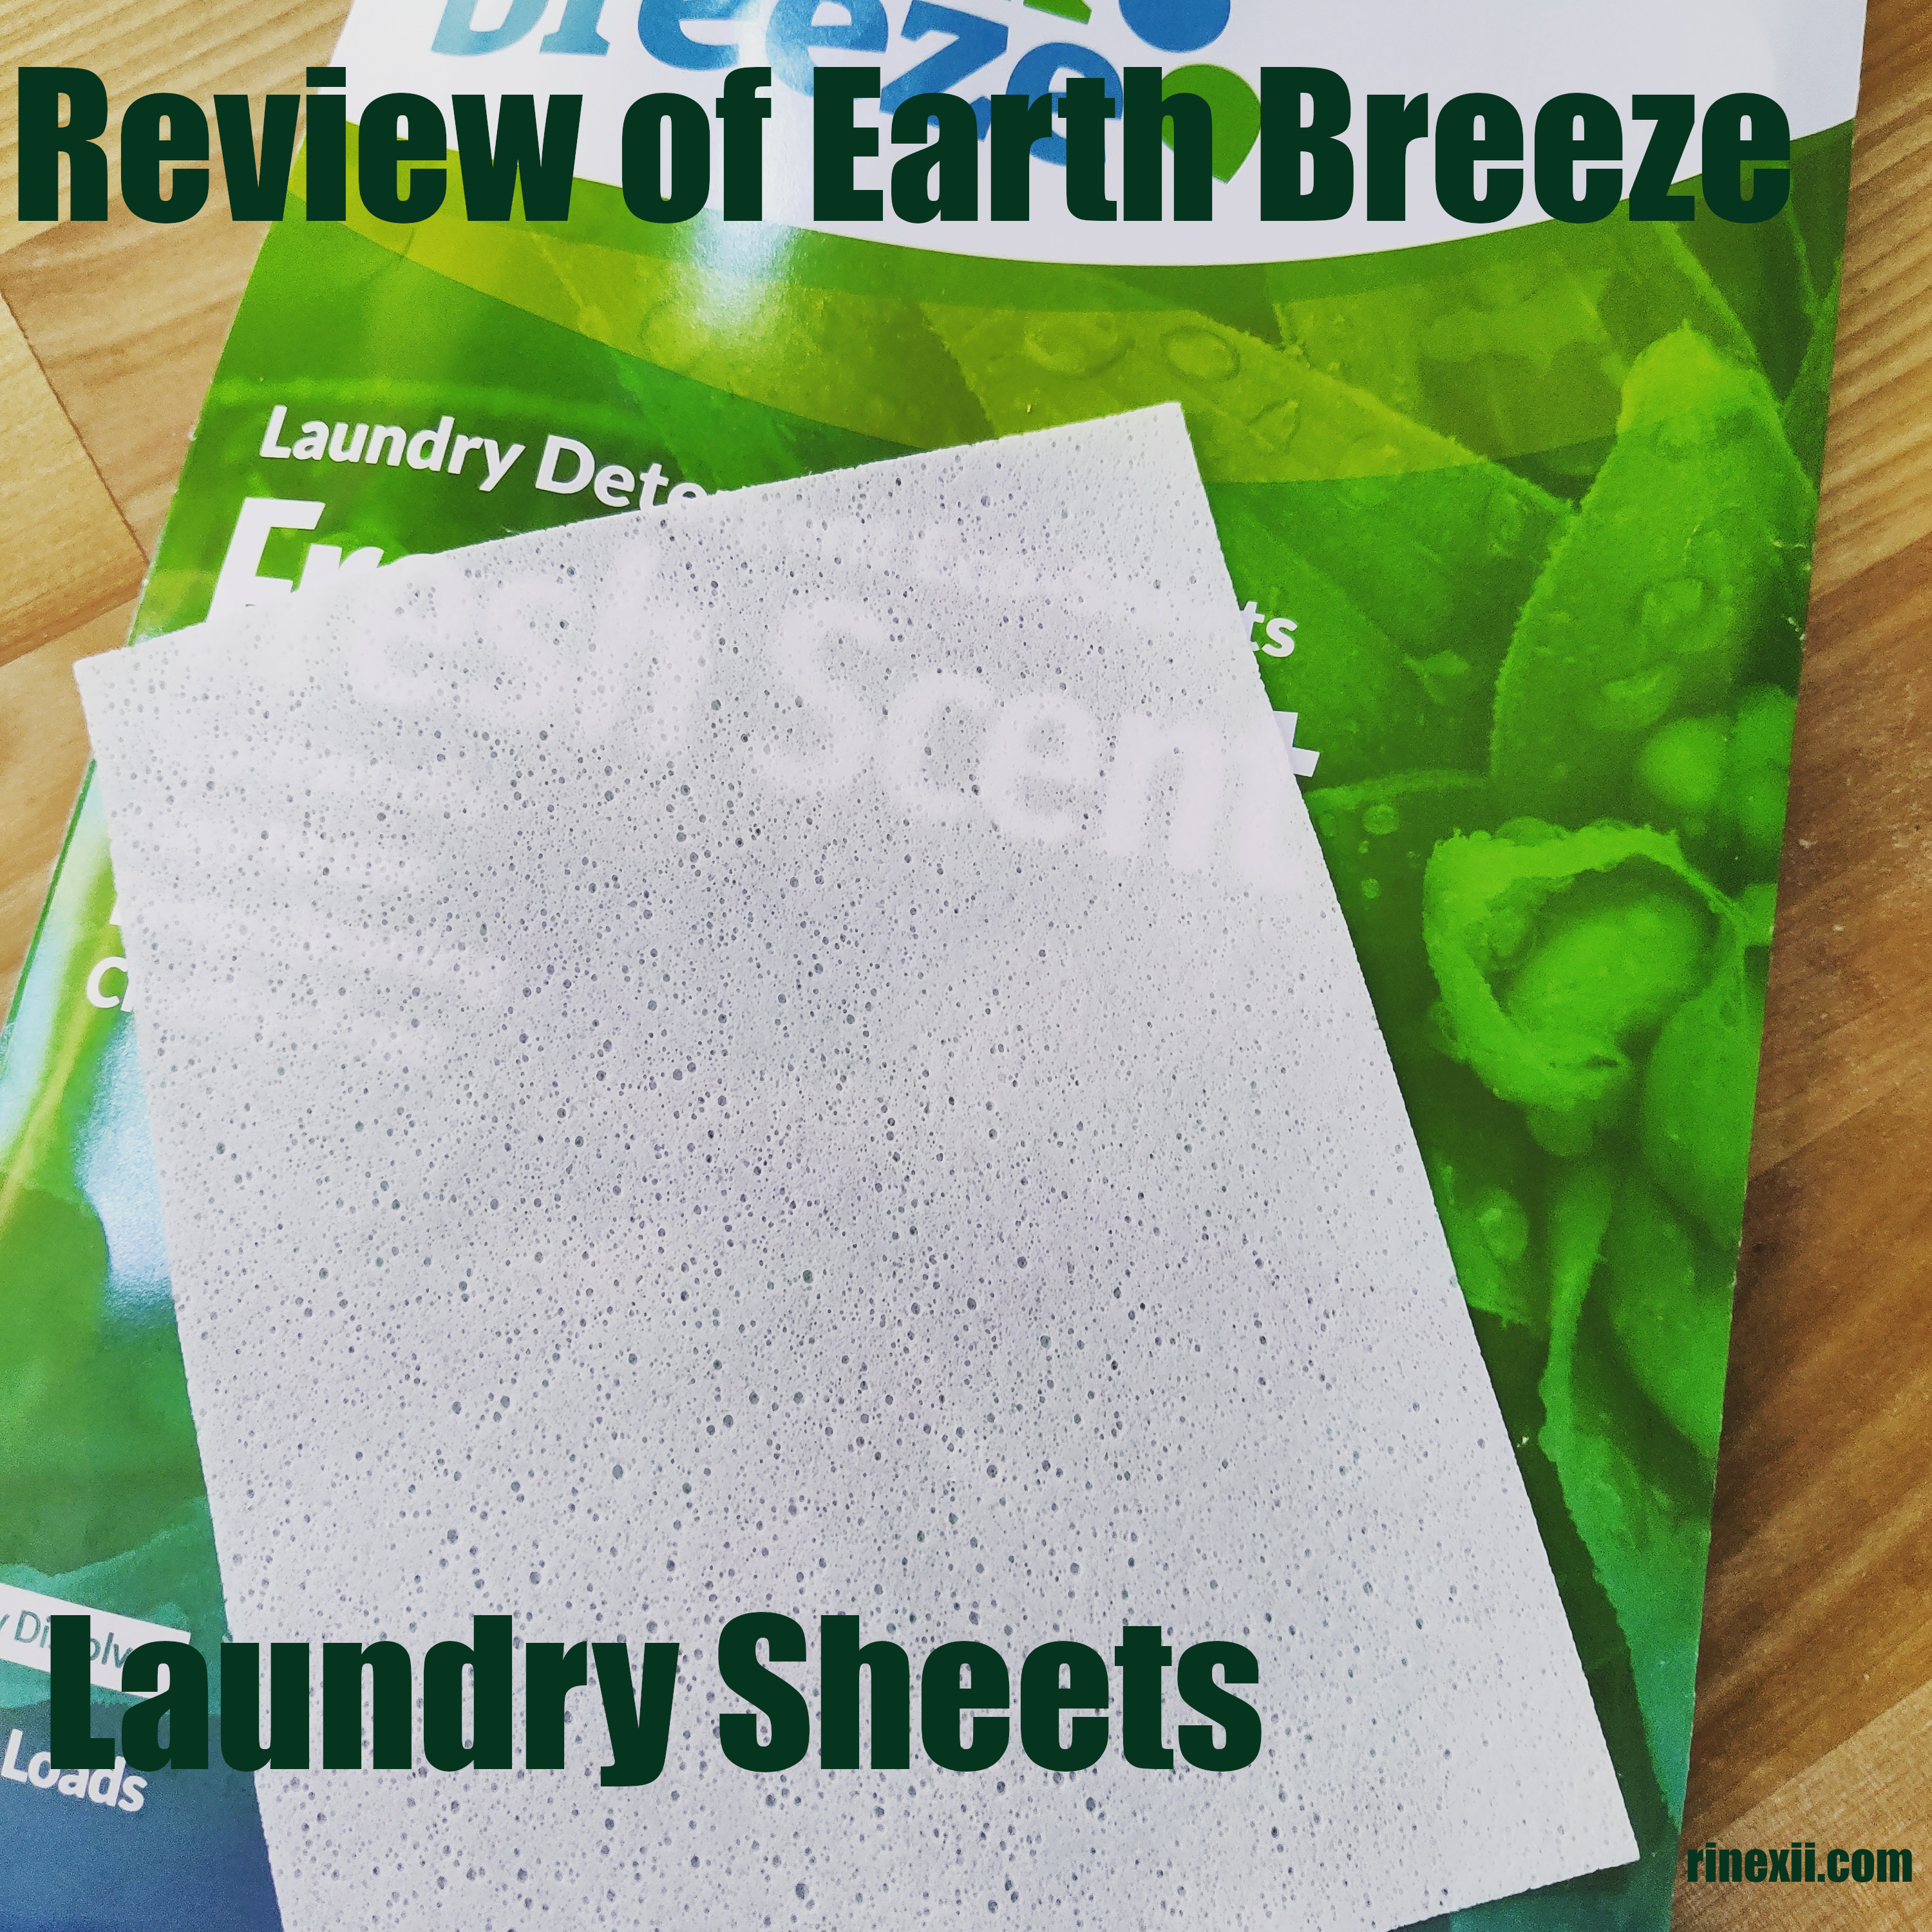 Review of Earth Breeze Laundry Sheets